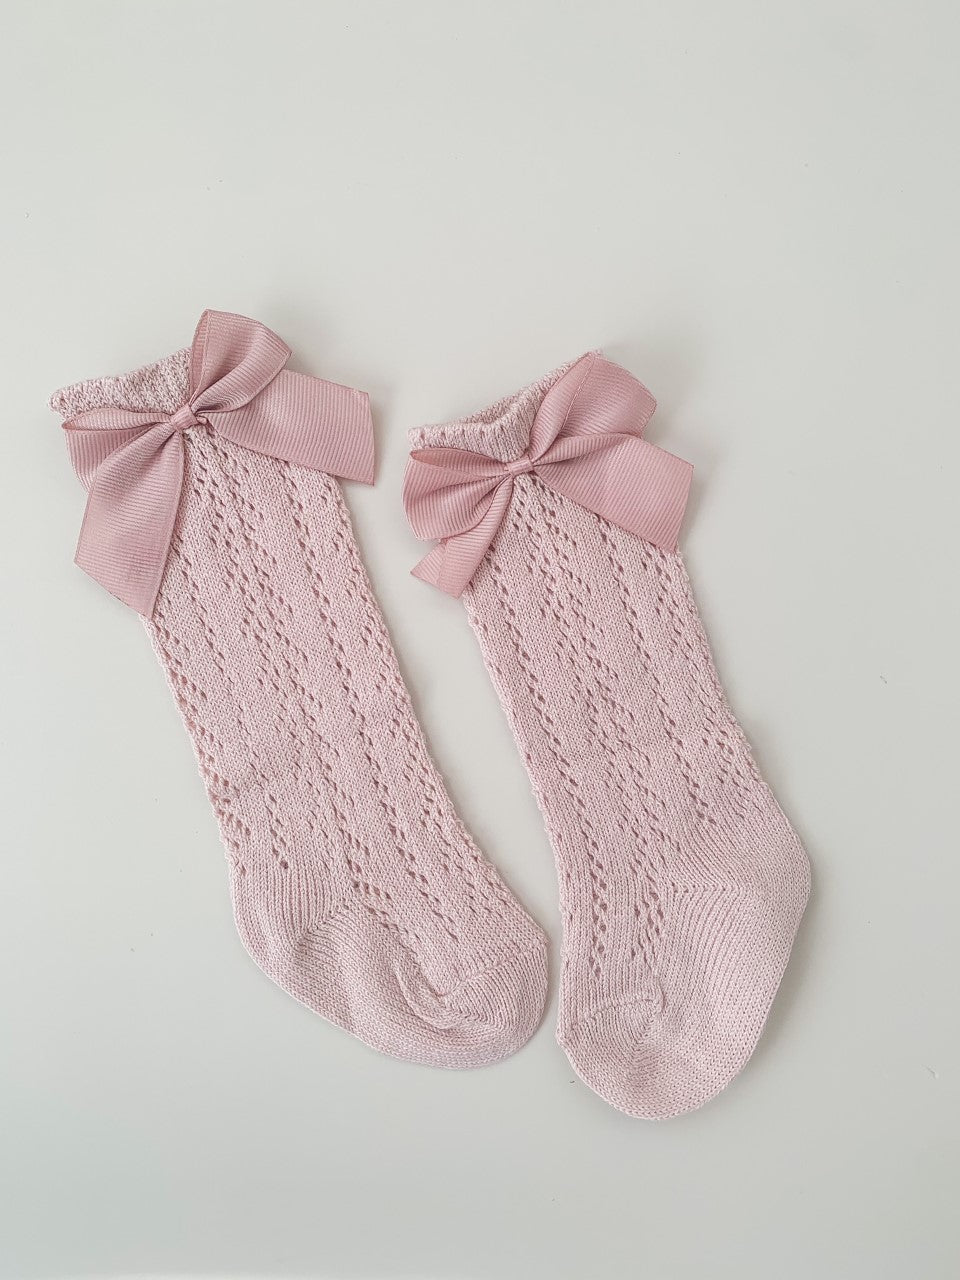 SPANISH OPENWORK LACE KNEE HIGH BOW SOCKS - DUSTY PINK